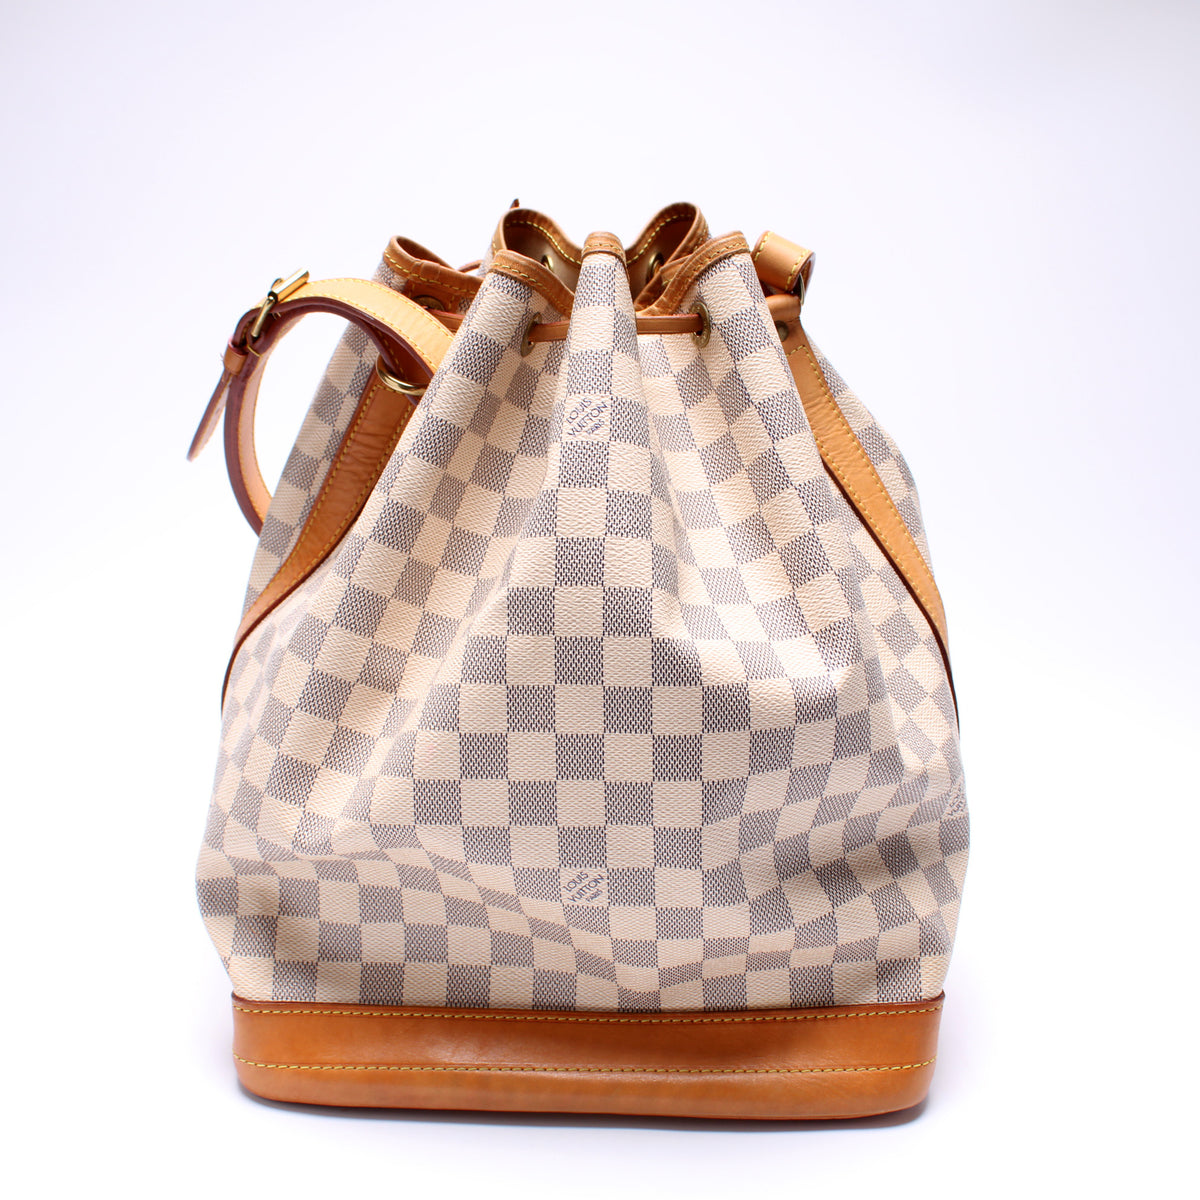 Usnasa Preloved - Authentic LOUIS VUITTON Noe Damier Azur Drawstring  Shoulder Bag Made in France Date code : AR4047 Good condition (7.9/10)  ***come with original dustbag Price : RM2500 Wasup +60139491441 (Nasa)